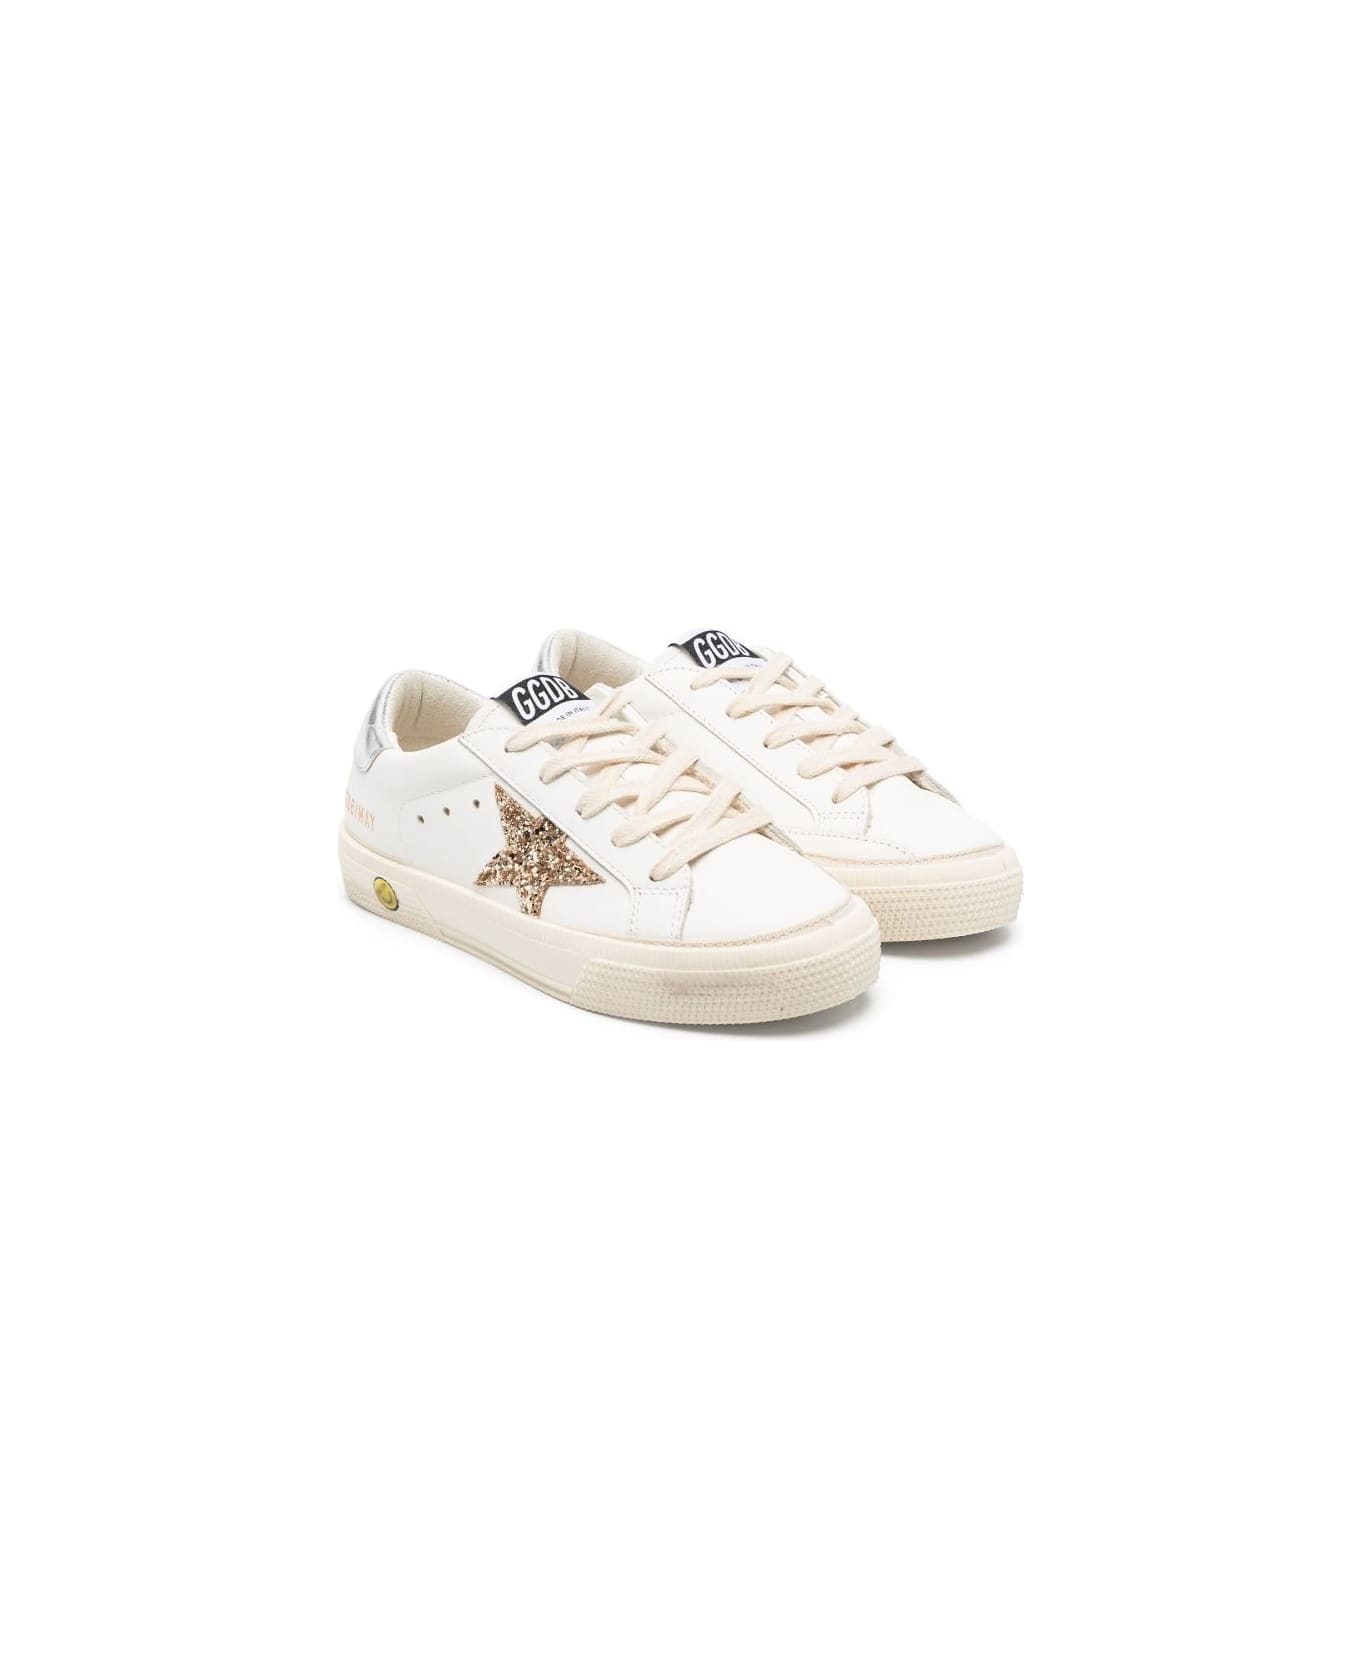 Golden Goose Sneakers Bianche In Pelle Con Lacci Bambina - Bianco